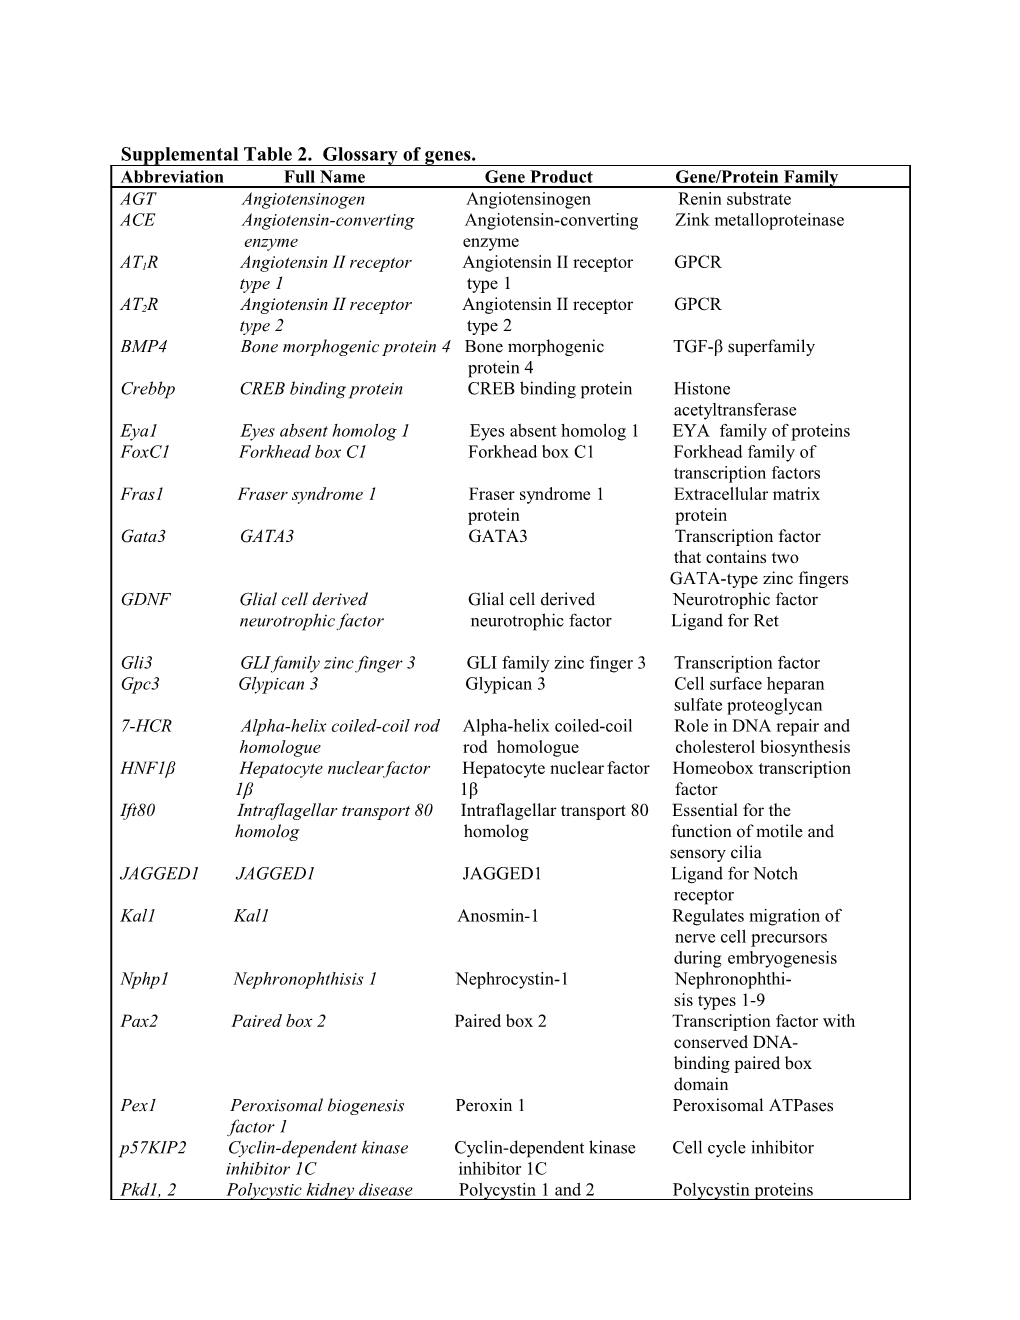 Supplemental Table 2. Glossary of Genes